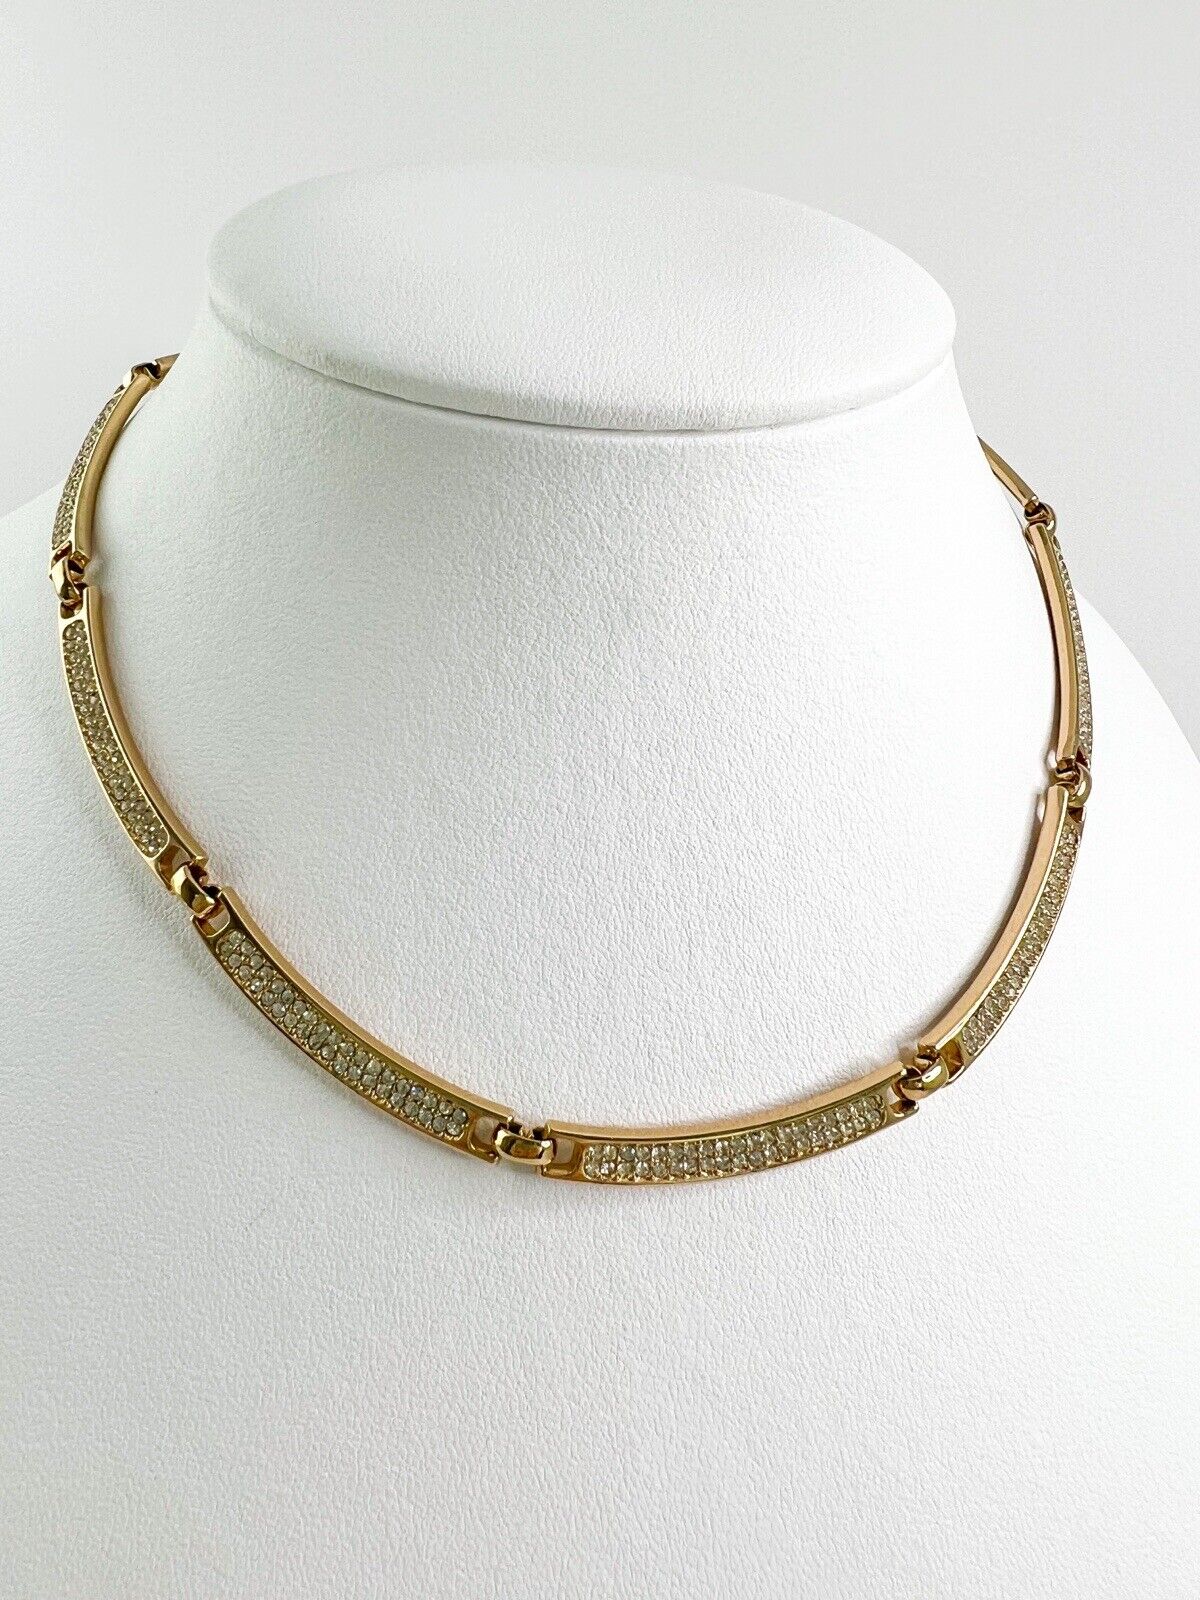 Vintage Christian Dior Necklace, Dior Necklace, Vintage Necklace, Choker Necklace Gold, Chunky Necklace, Gift for her, Jewelry for Women